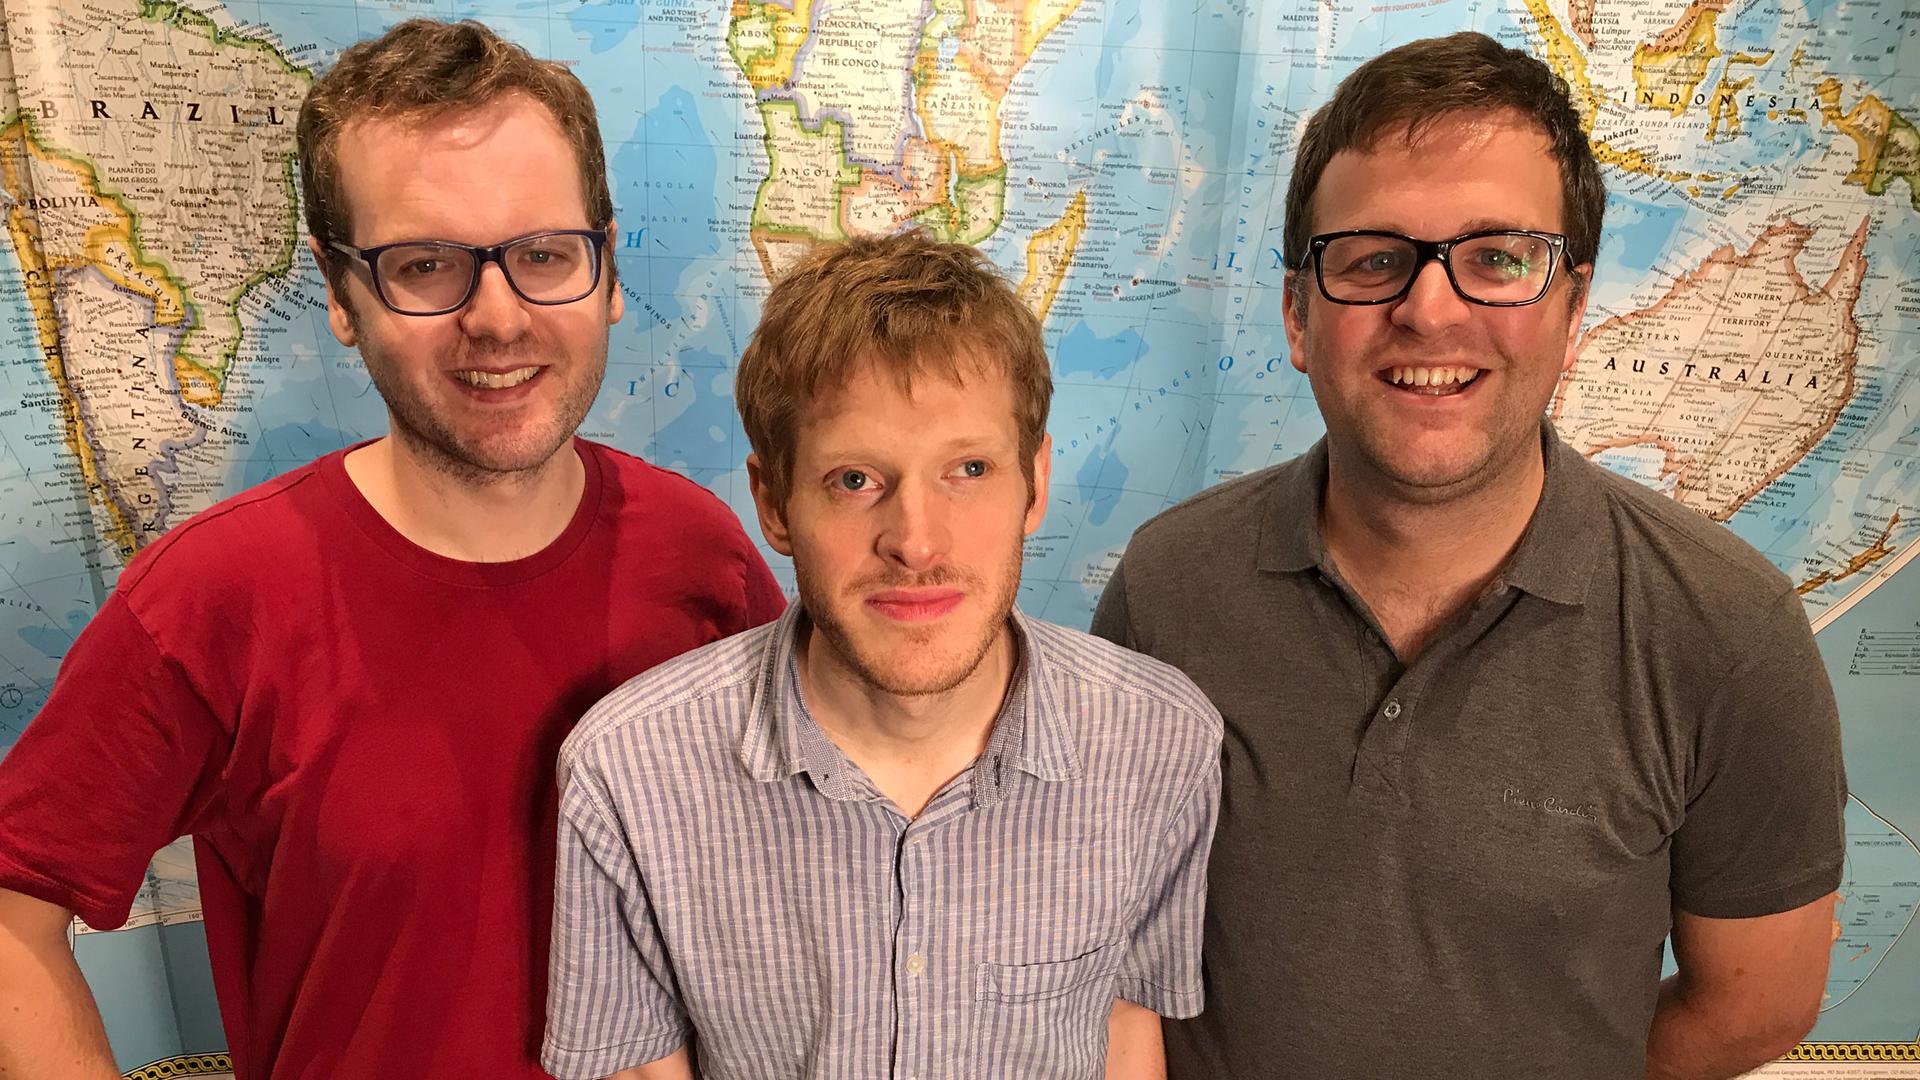 A group of three men are photographed against a world map